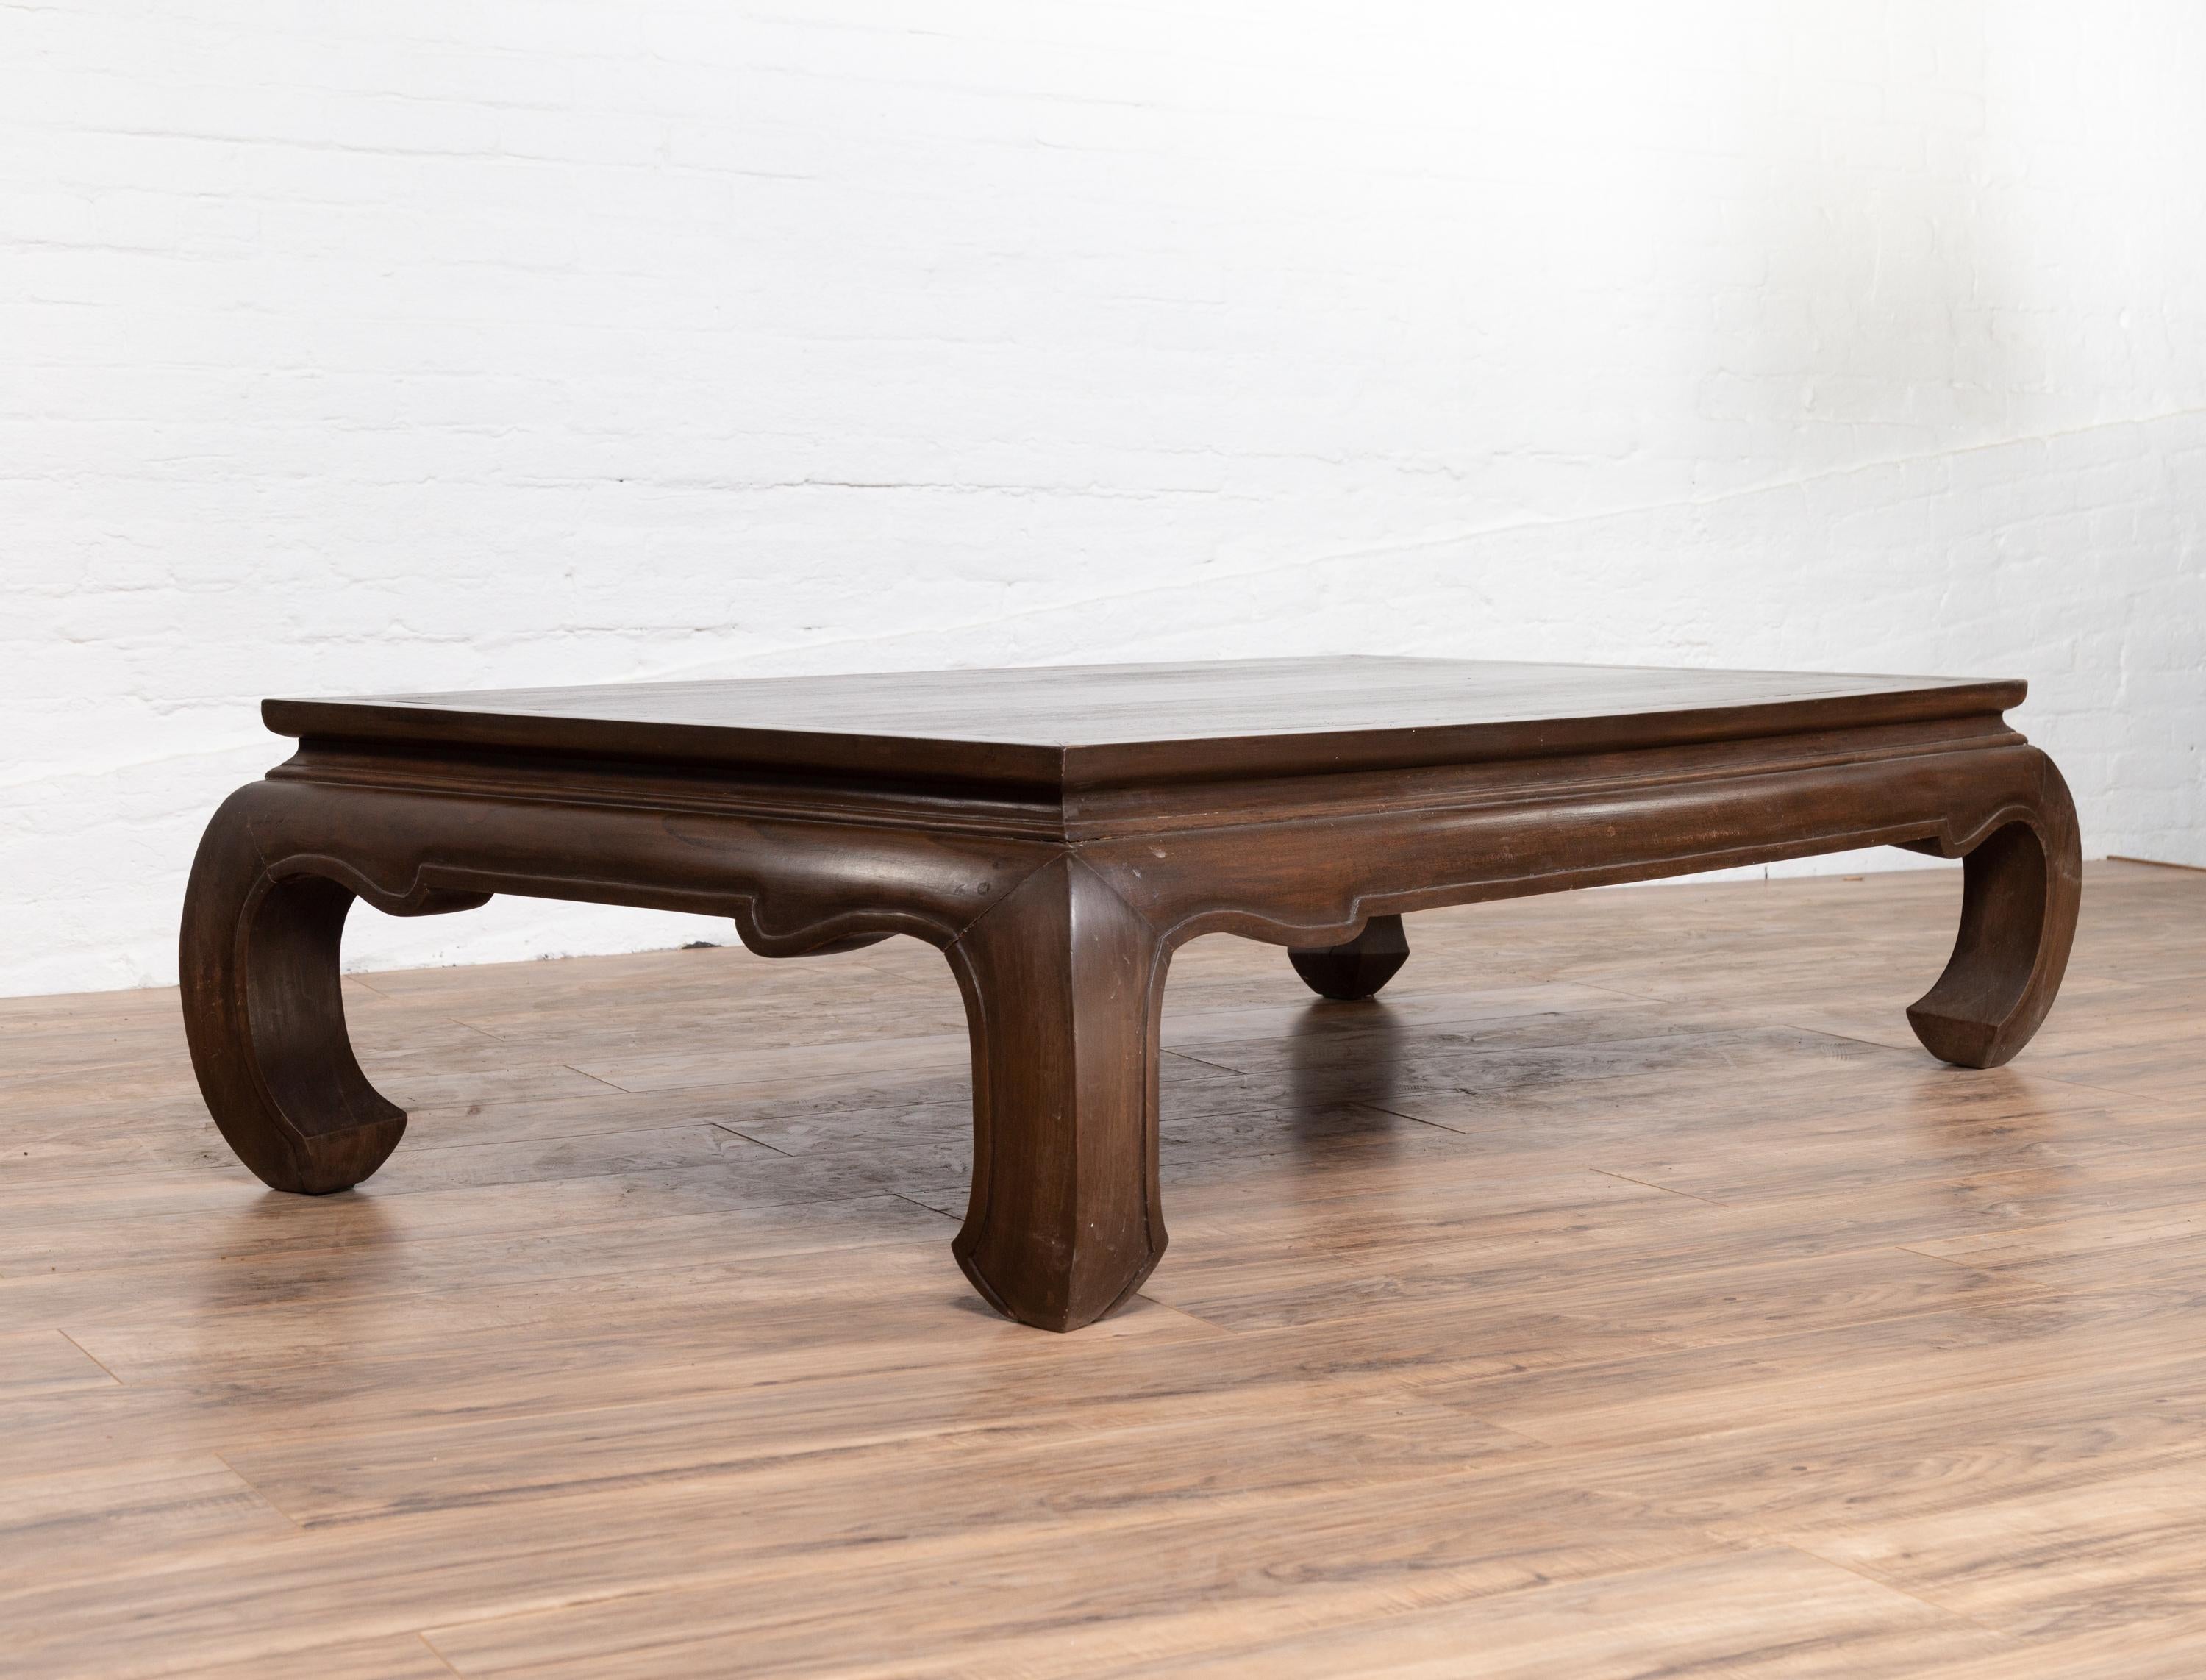 20th Century Vintage Thai Opium Bed Style Waisted Coffee Table with Dark Patina and Chow Legs